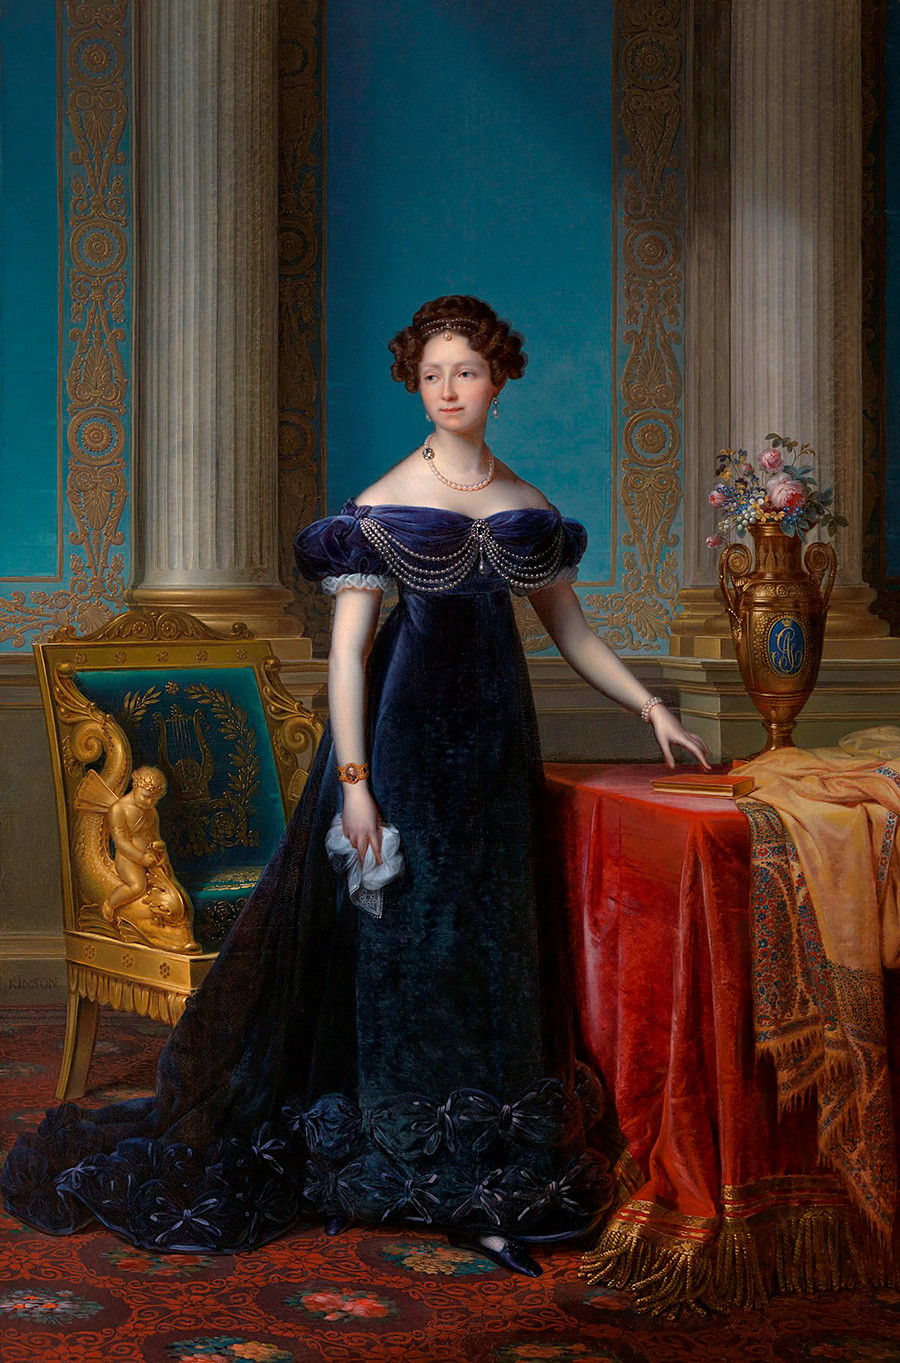 Queen of the Netherlands, Anna Pavlovna of Russia 